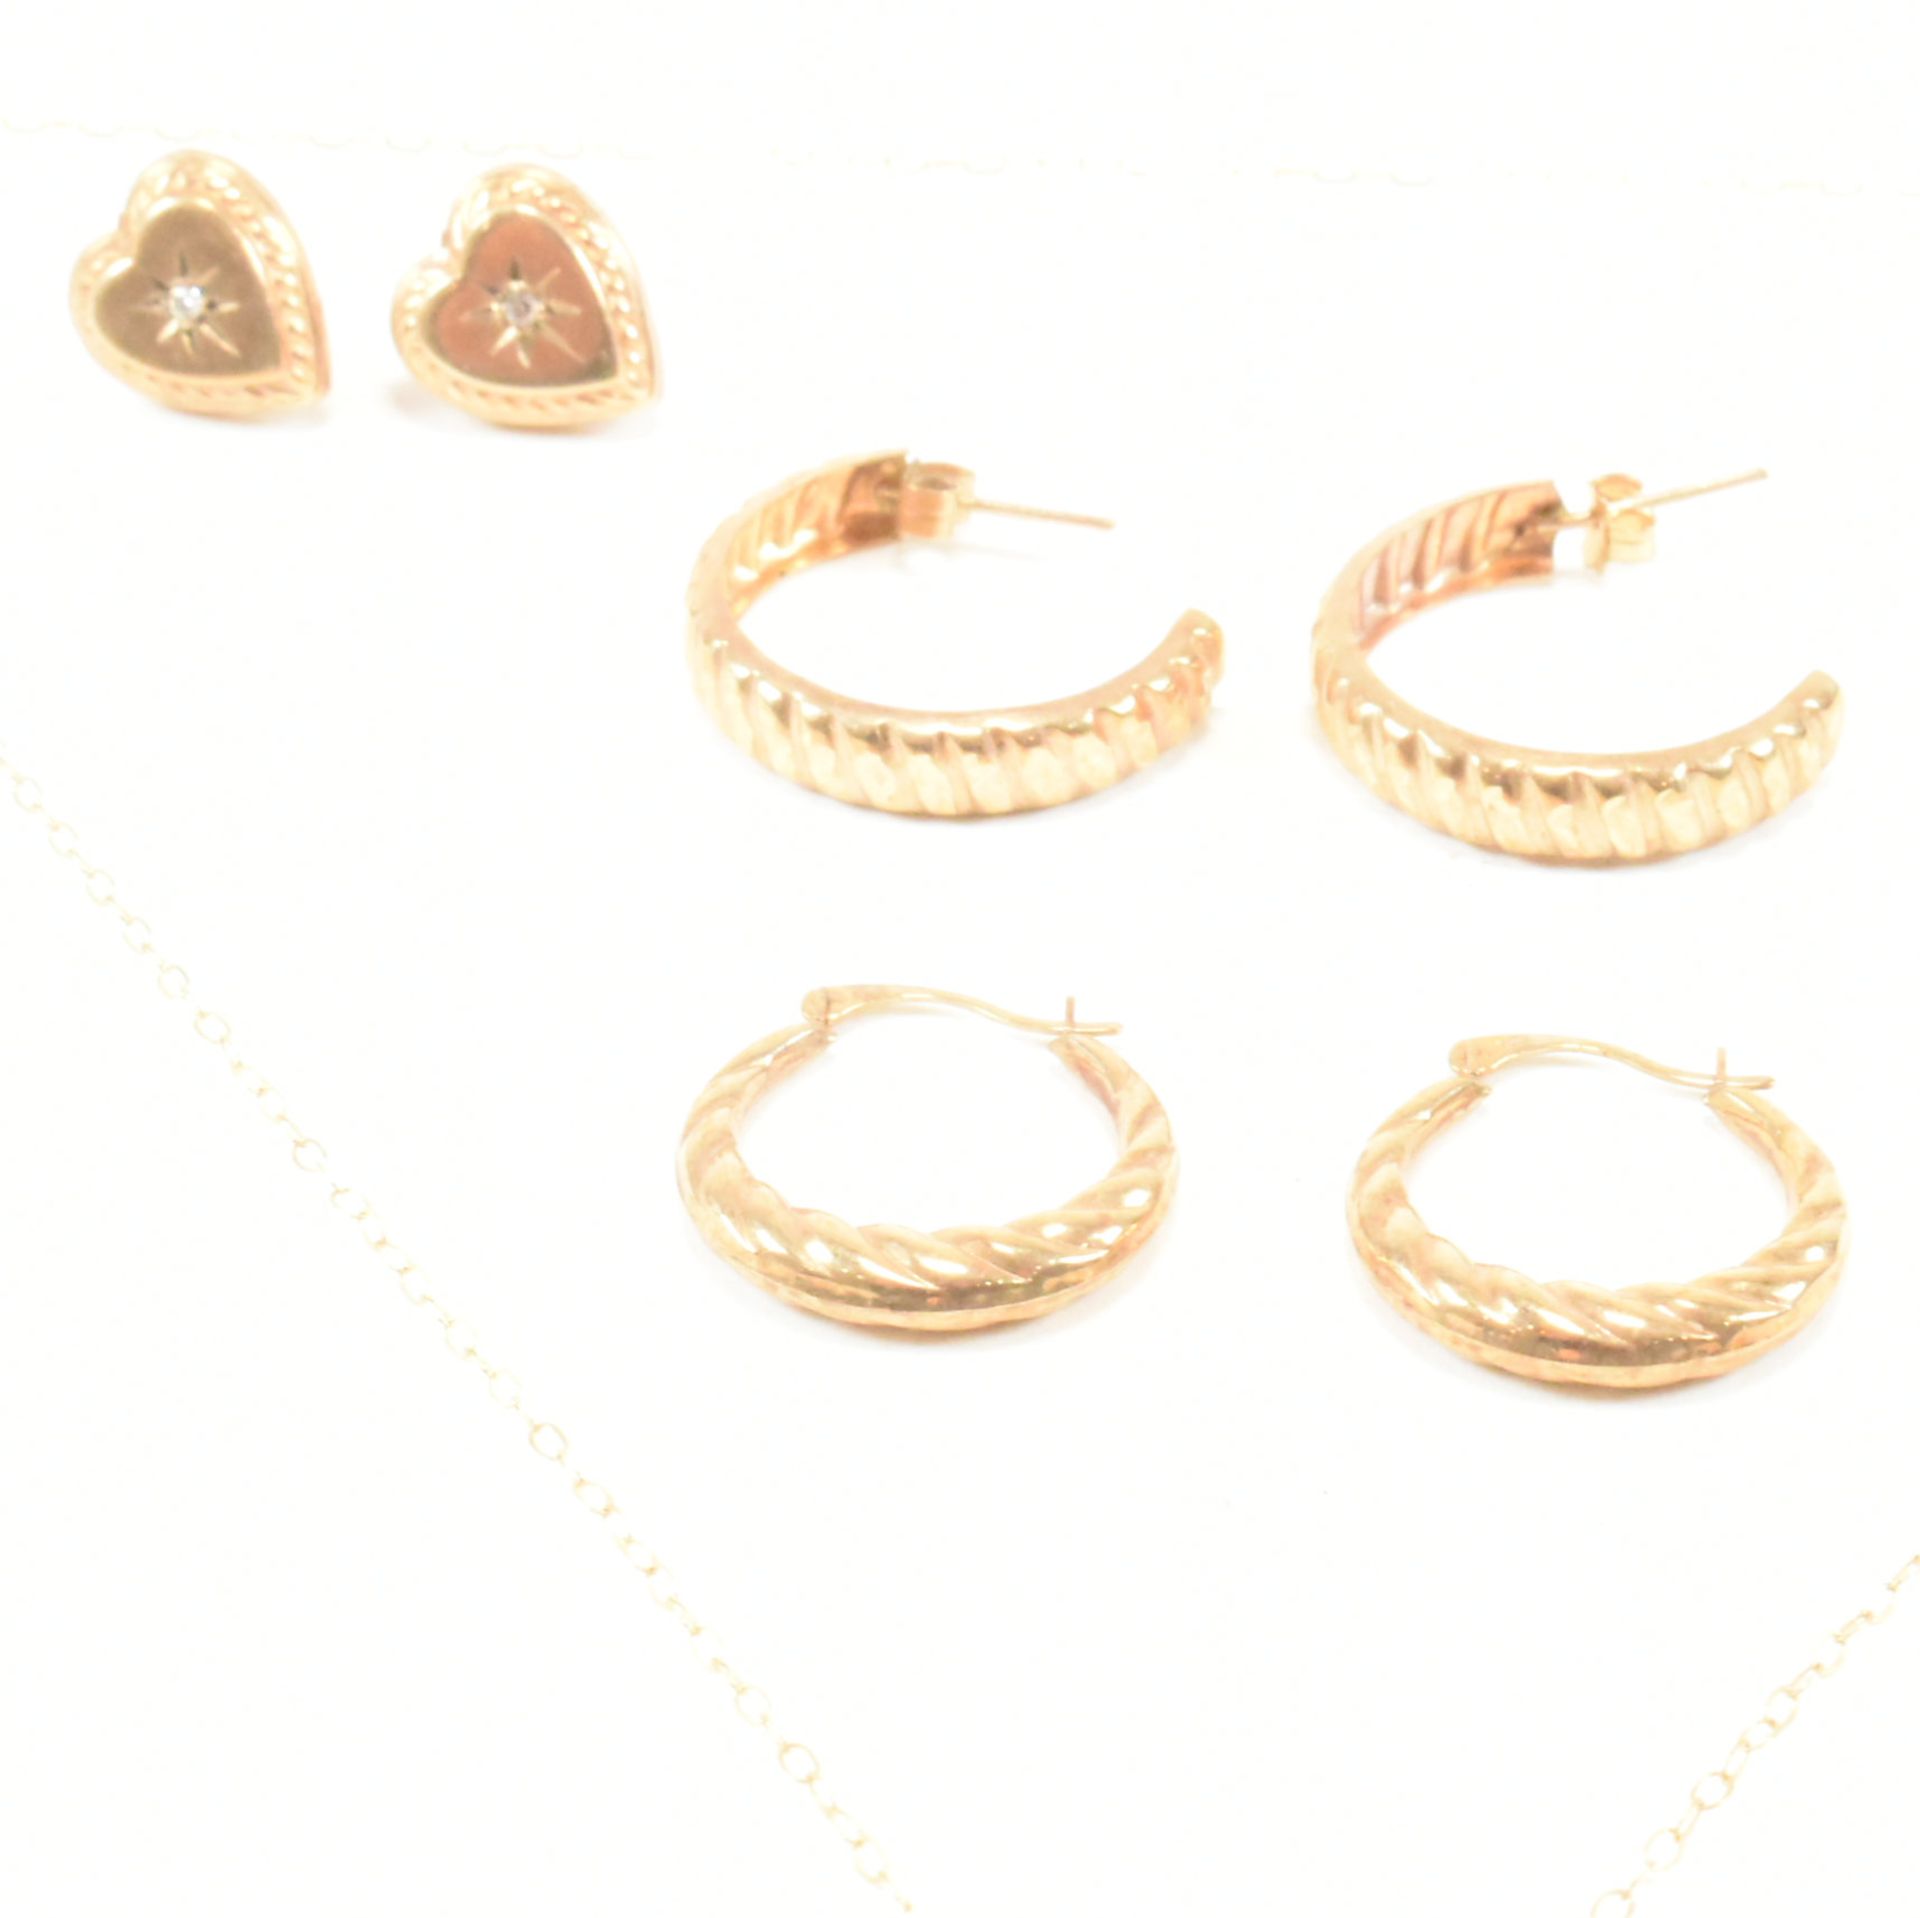 FOUR PAIRS OF 9CT GOLD EARRINGS & A 9CT GOLD PENDANT NECKLACE - Image 5 of 8